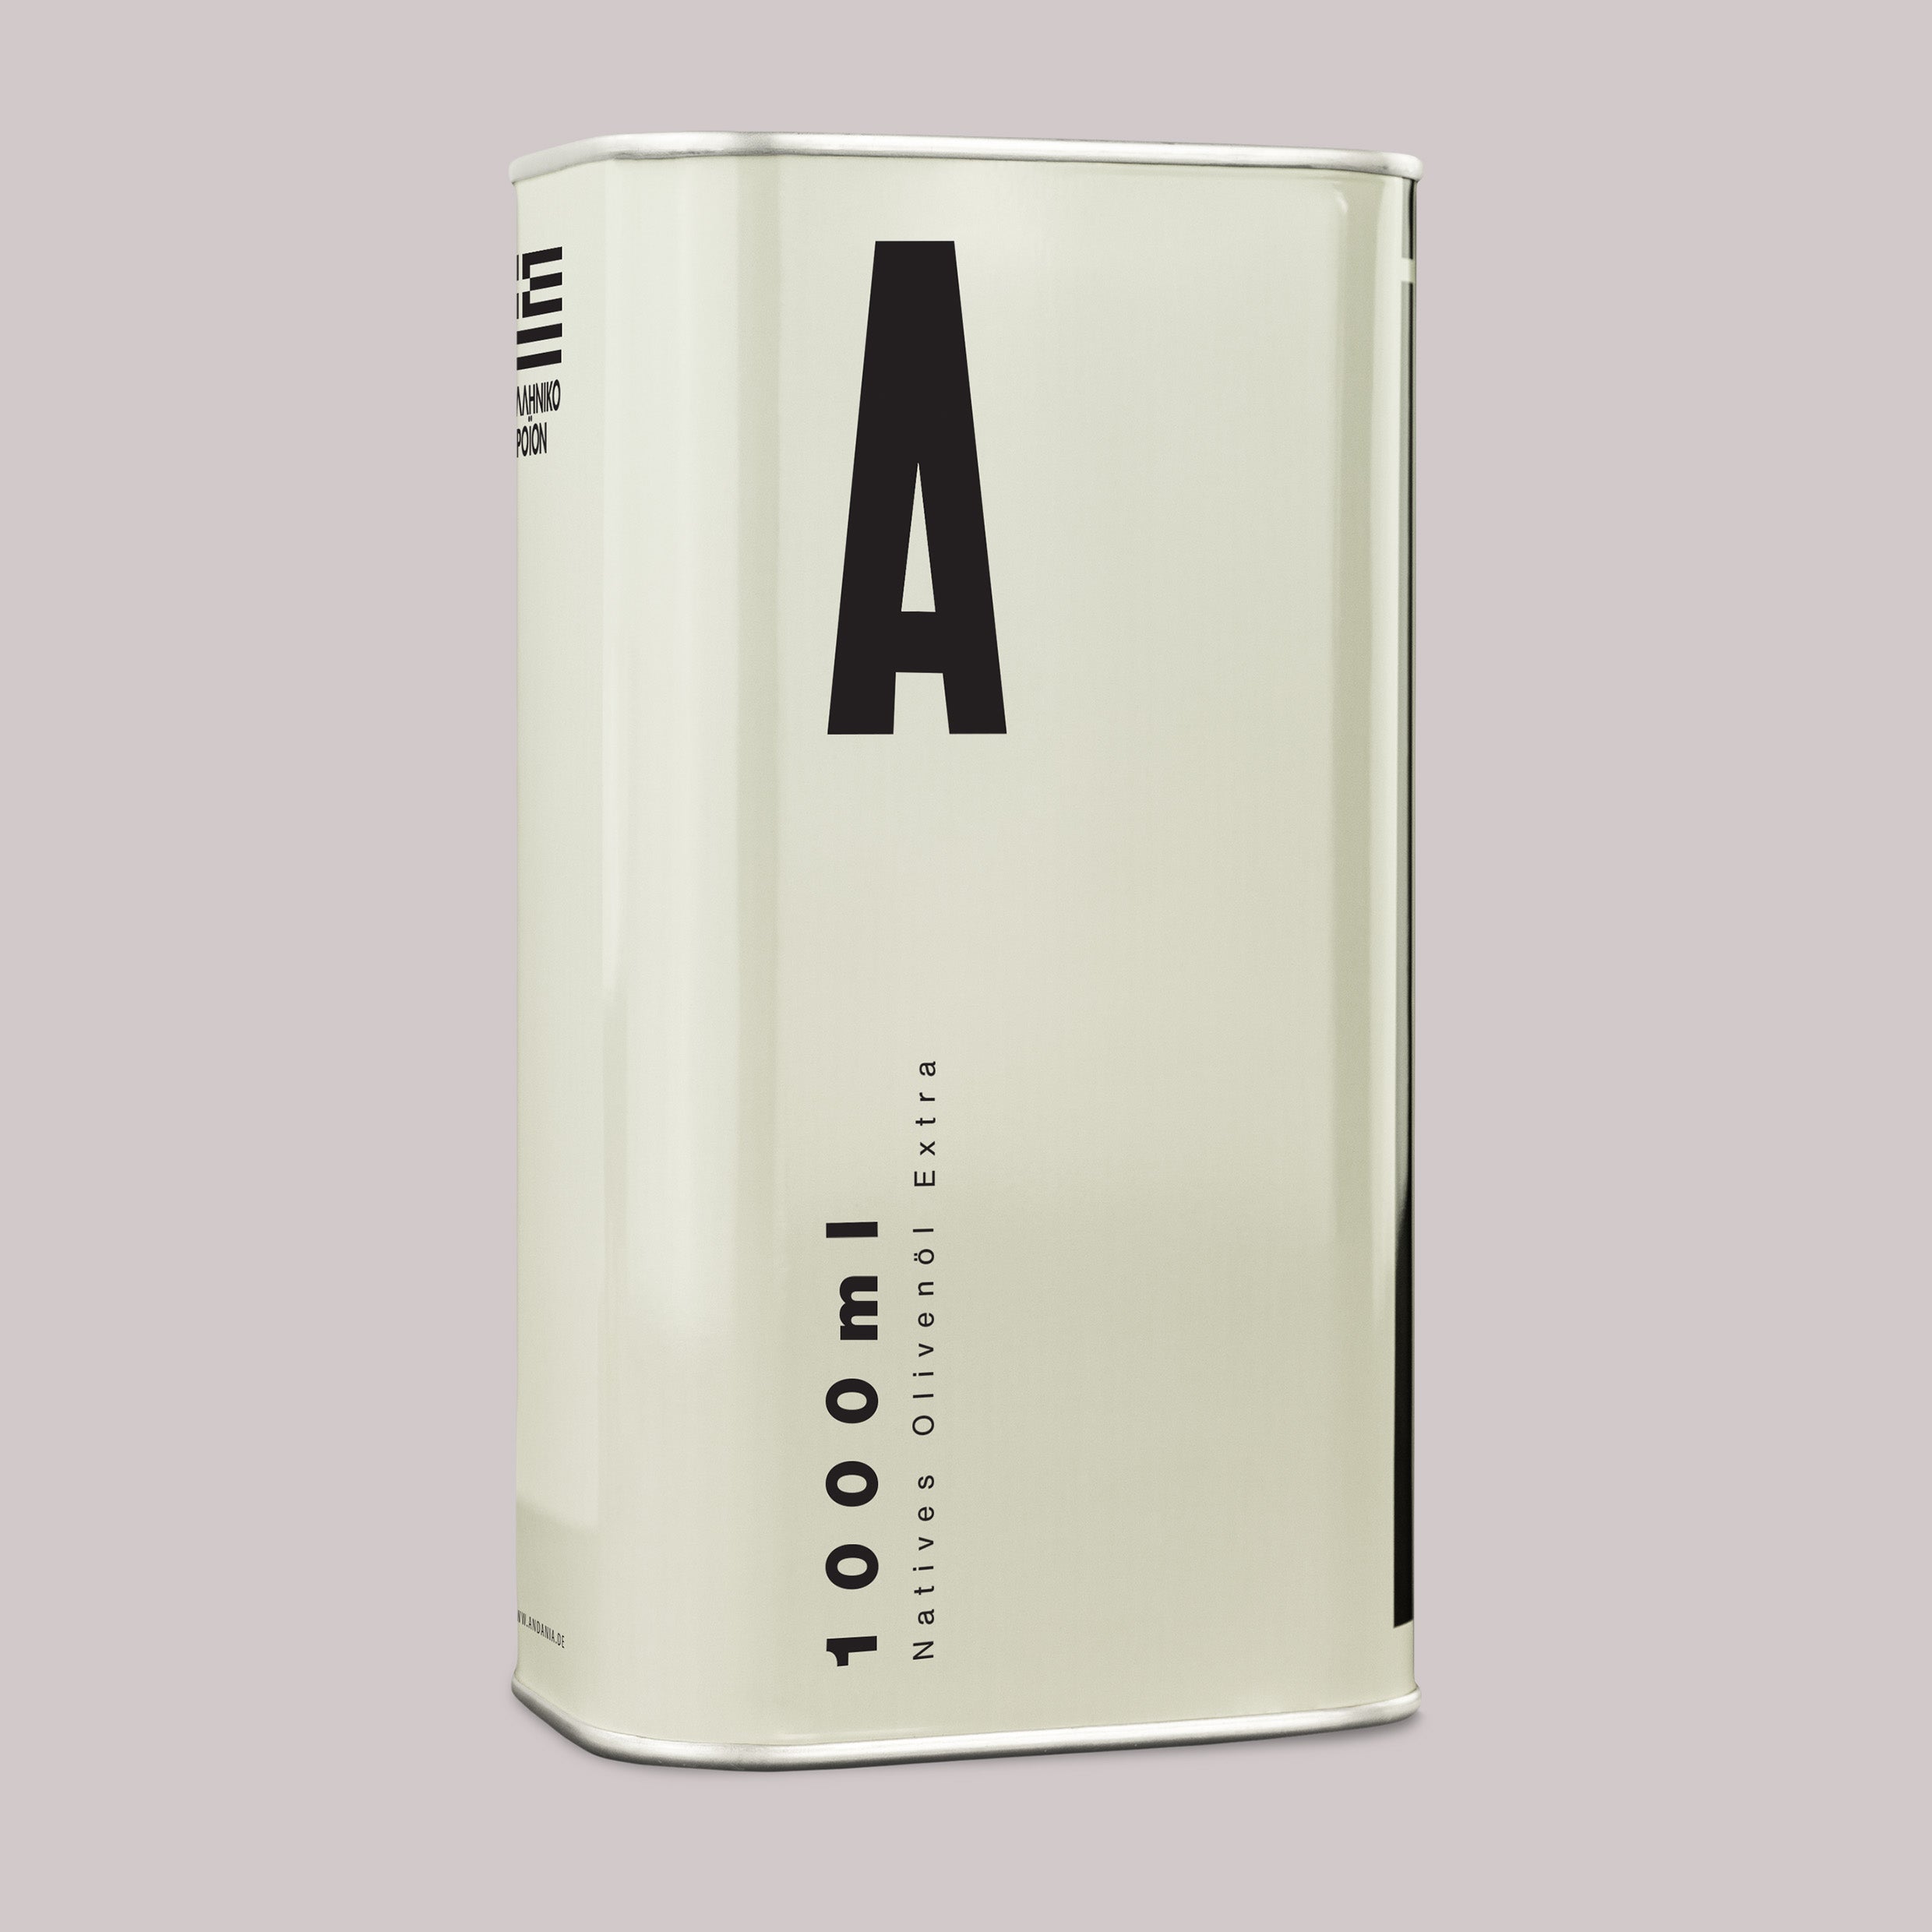 A! 1,000 ml (with visual defect) - Extra Virgin Olive Oil